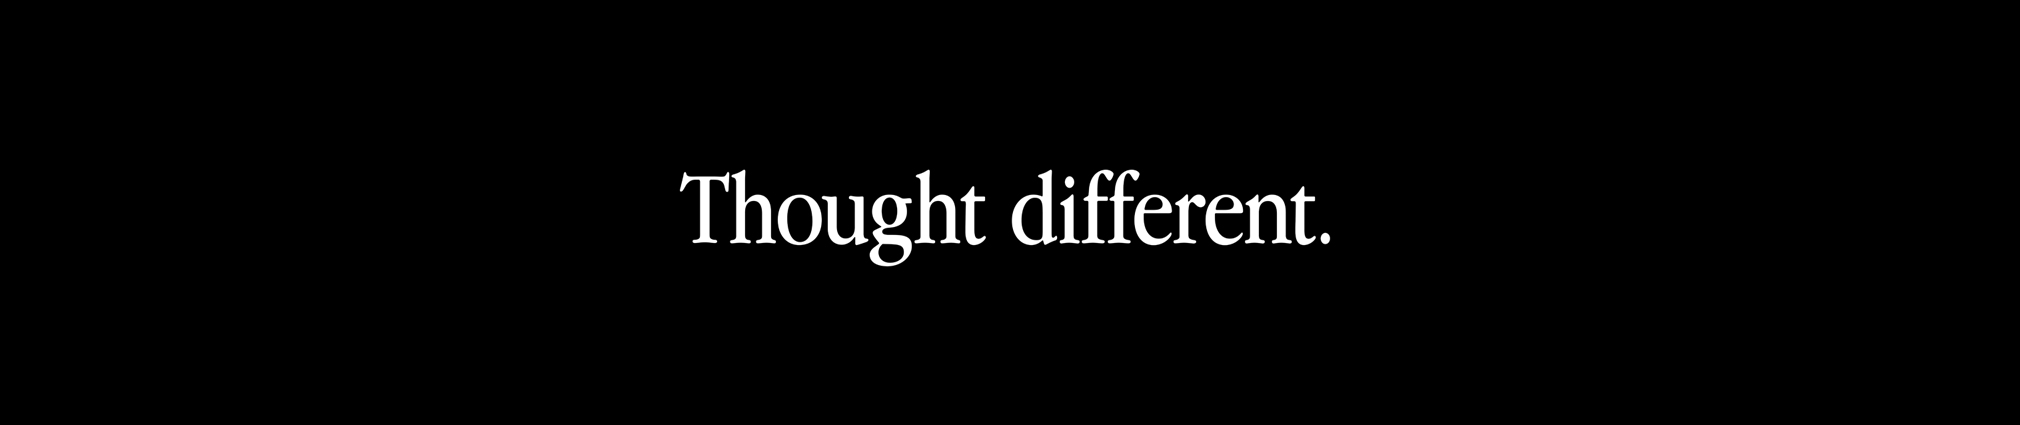 text: thought different